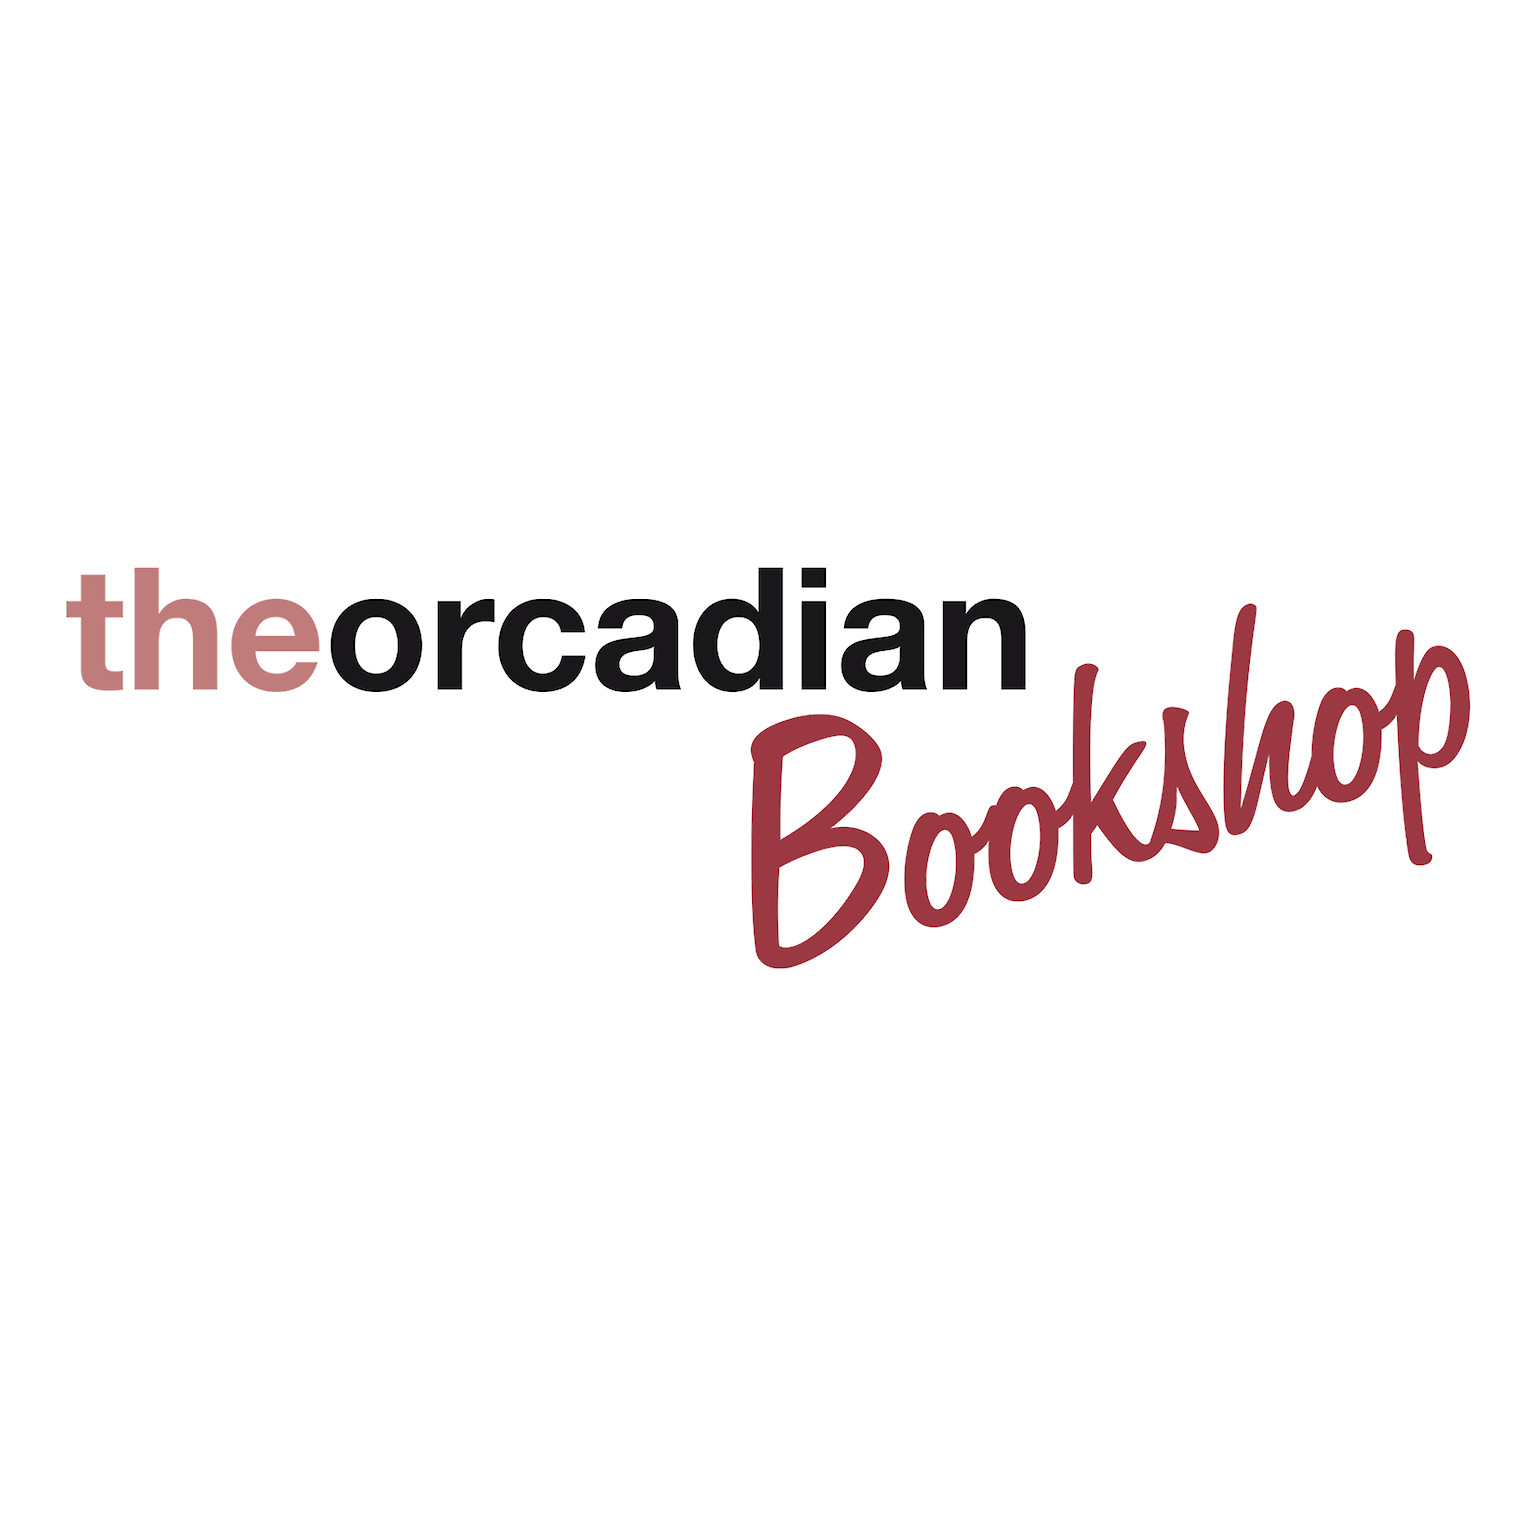 the-orcadian-bookshop-orkney